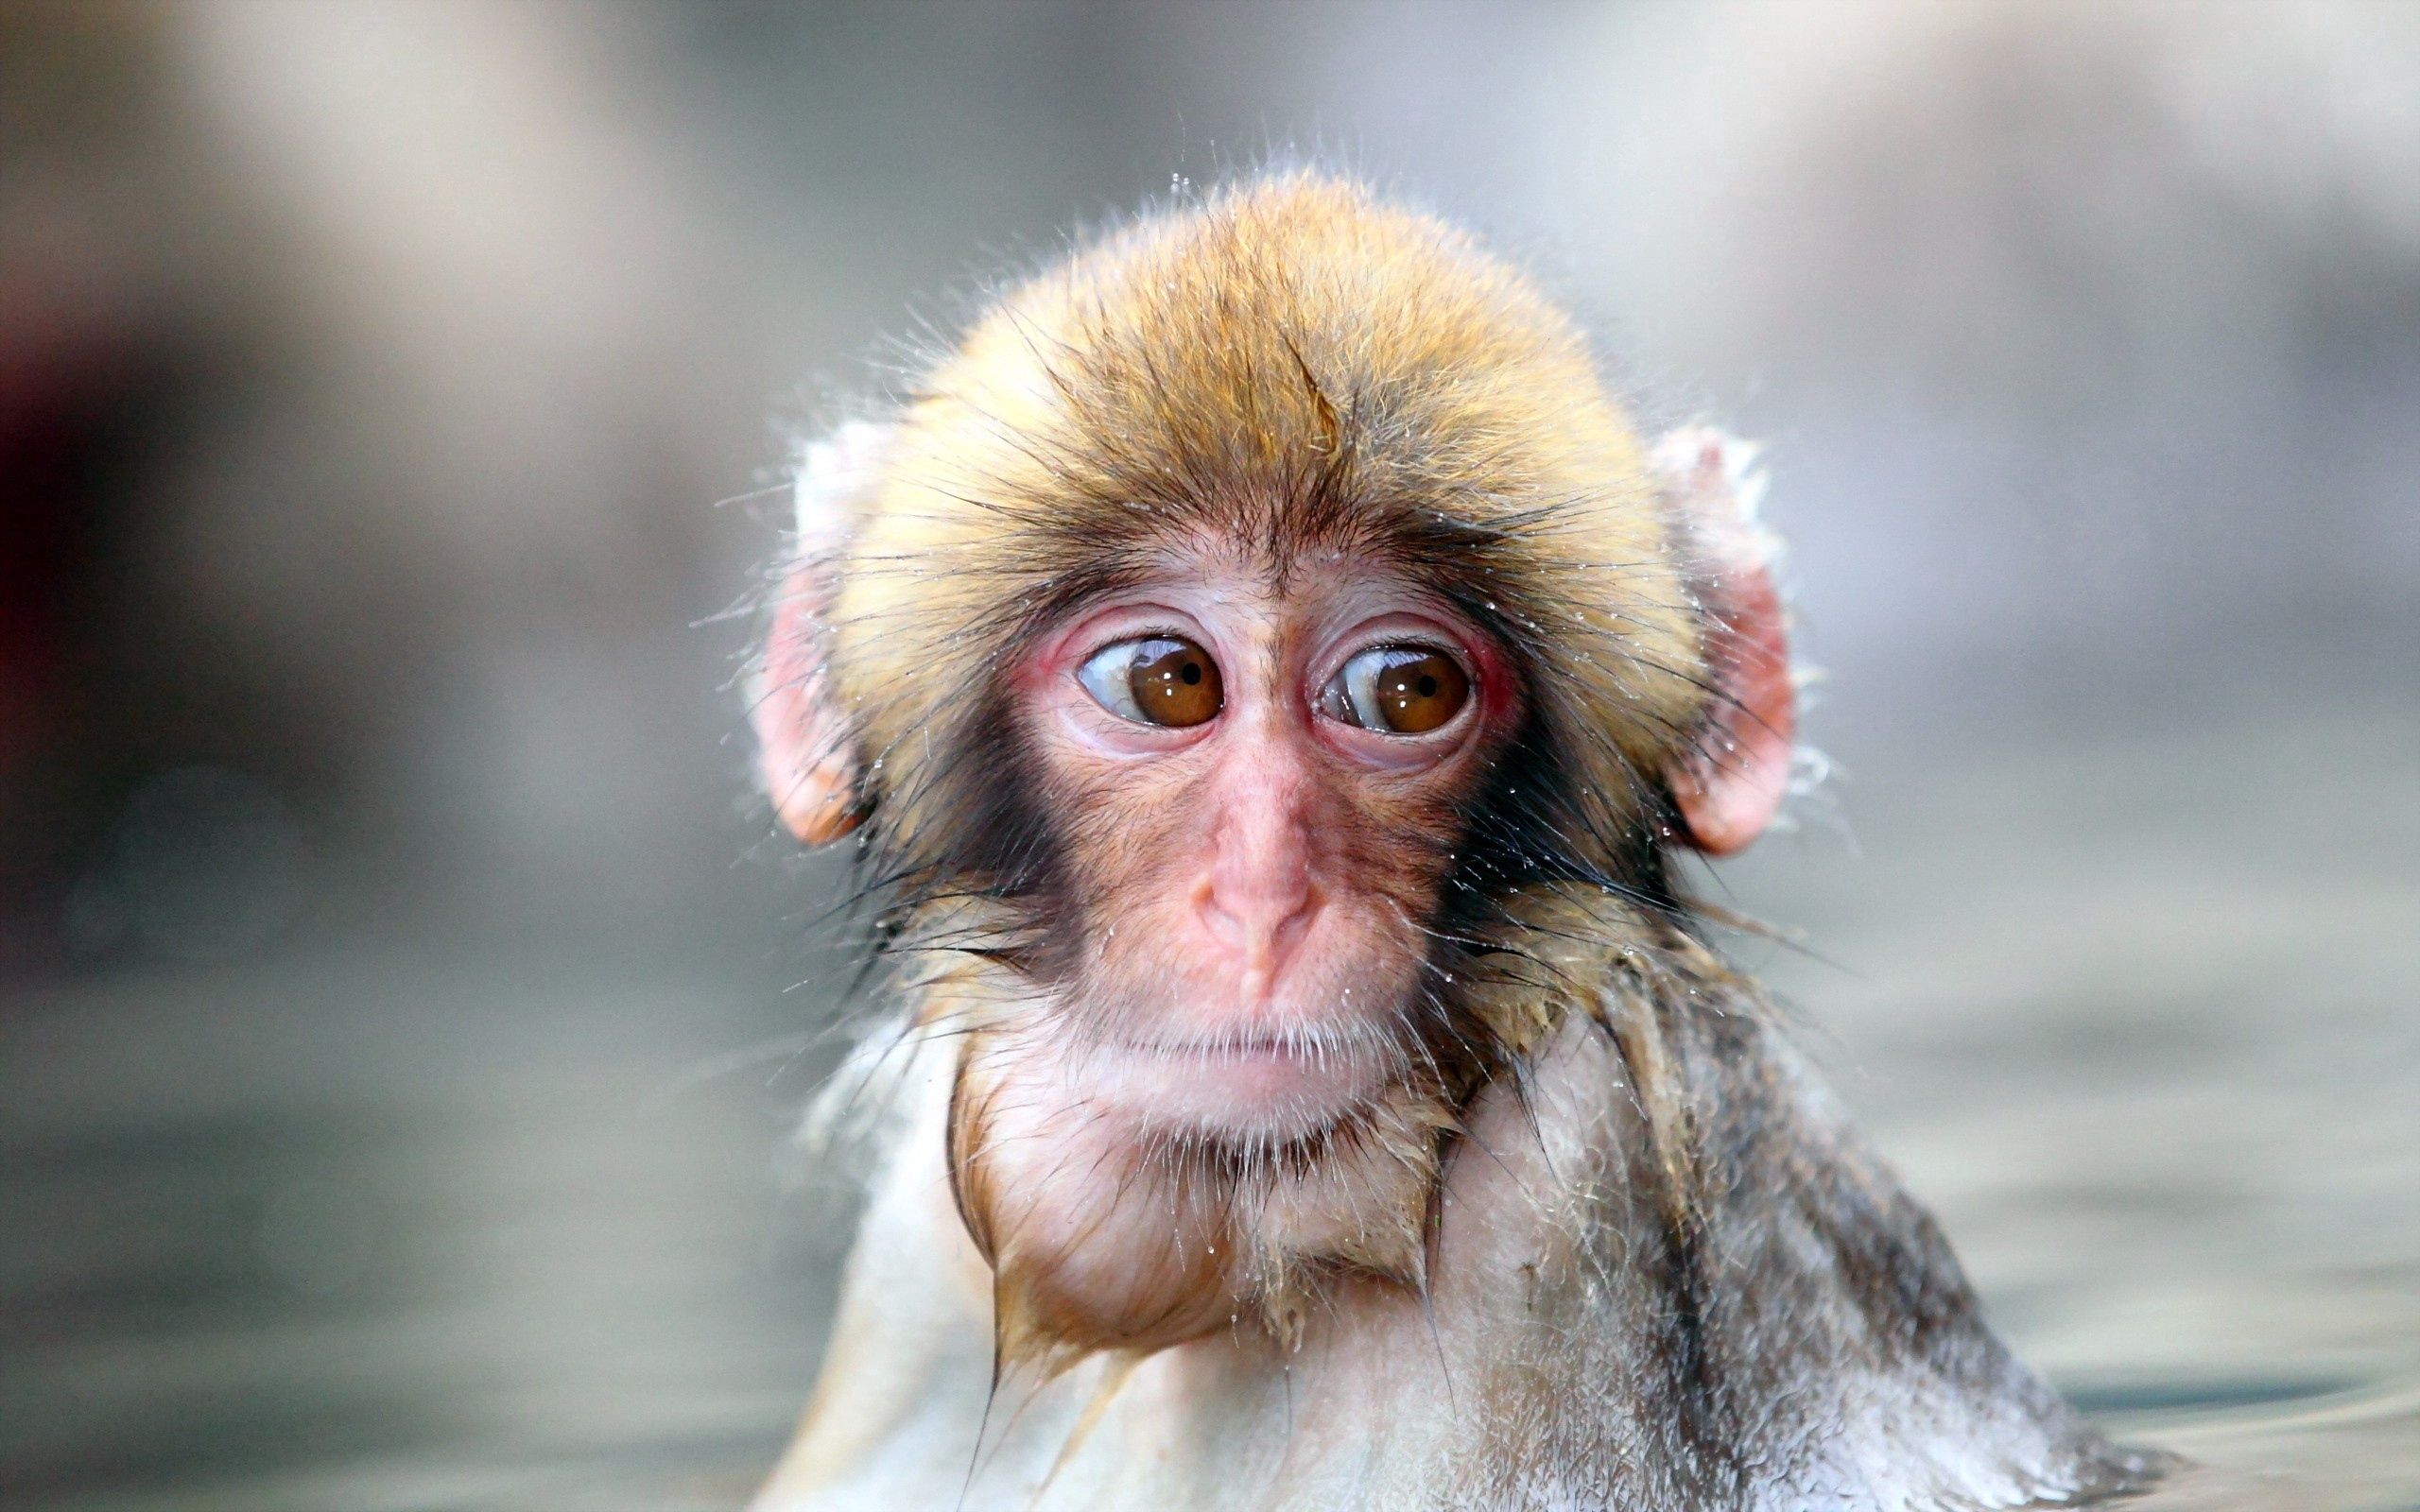 80786 download wallpaper sadness, animals, muzzle, wet, monkey, sight, opinion, sorrow screensavers and pictures for free